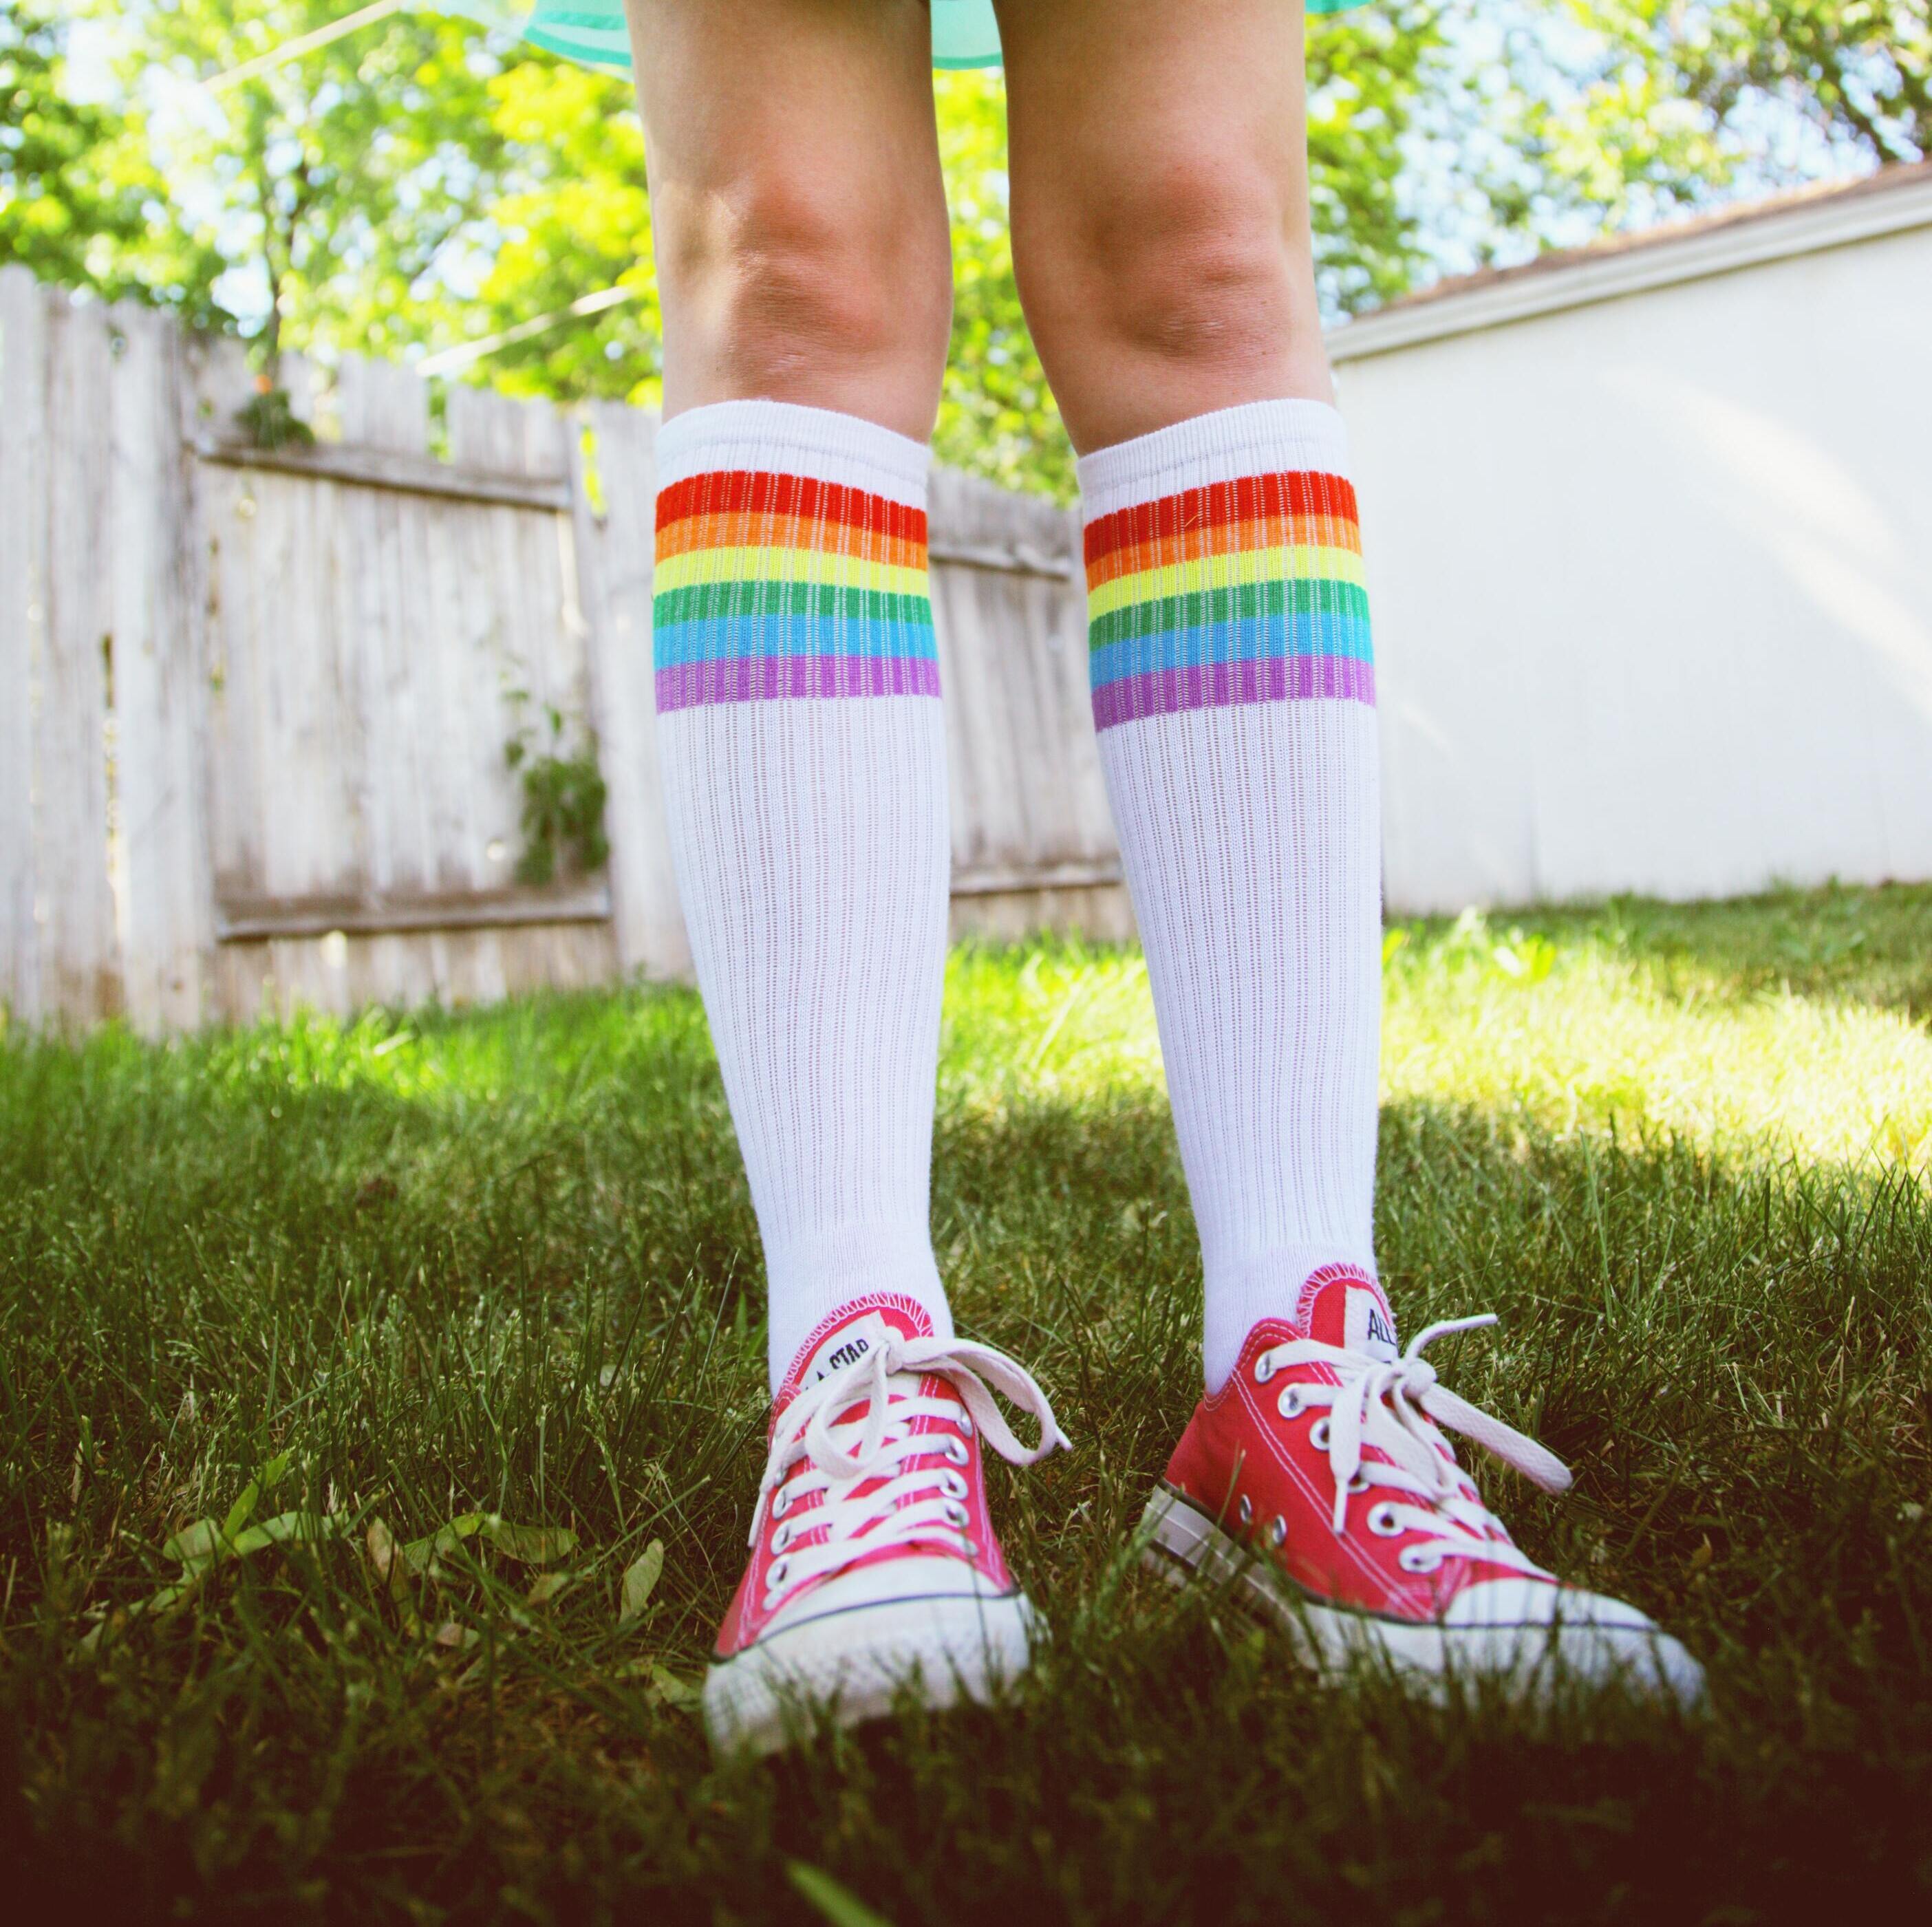 How To Style Your Girl With Knee High Socks?